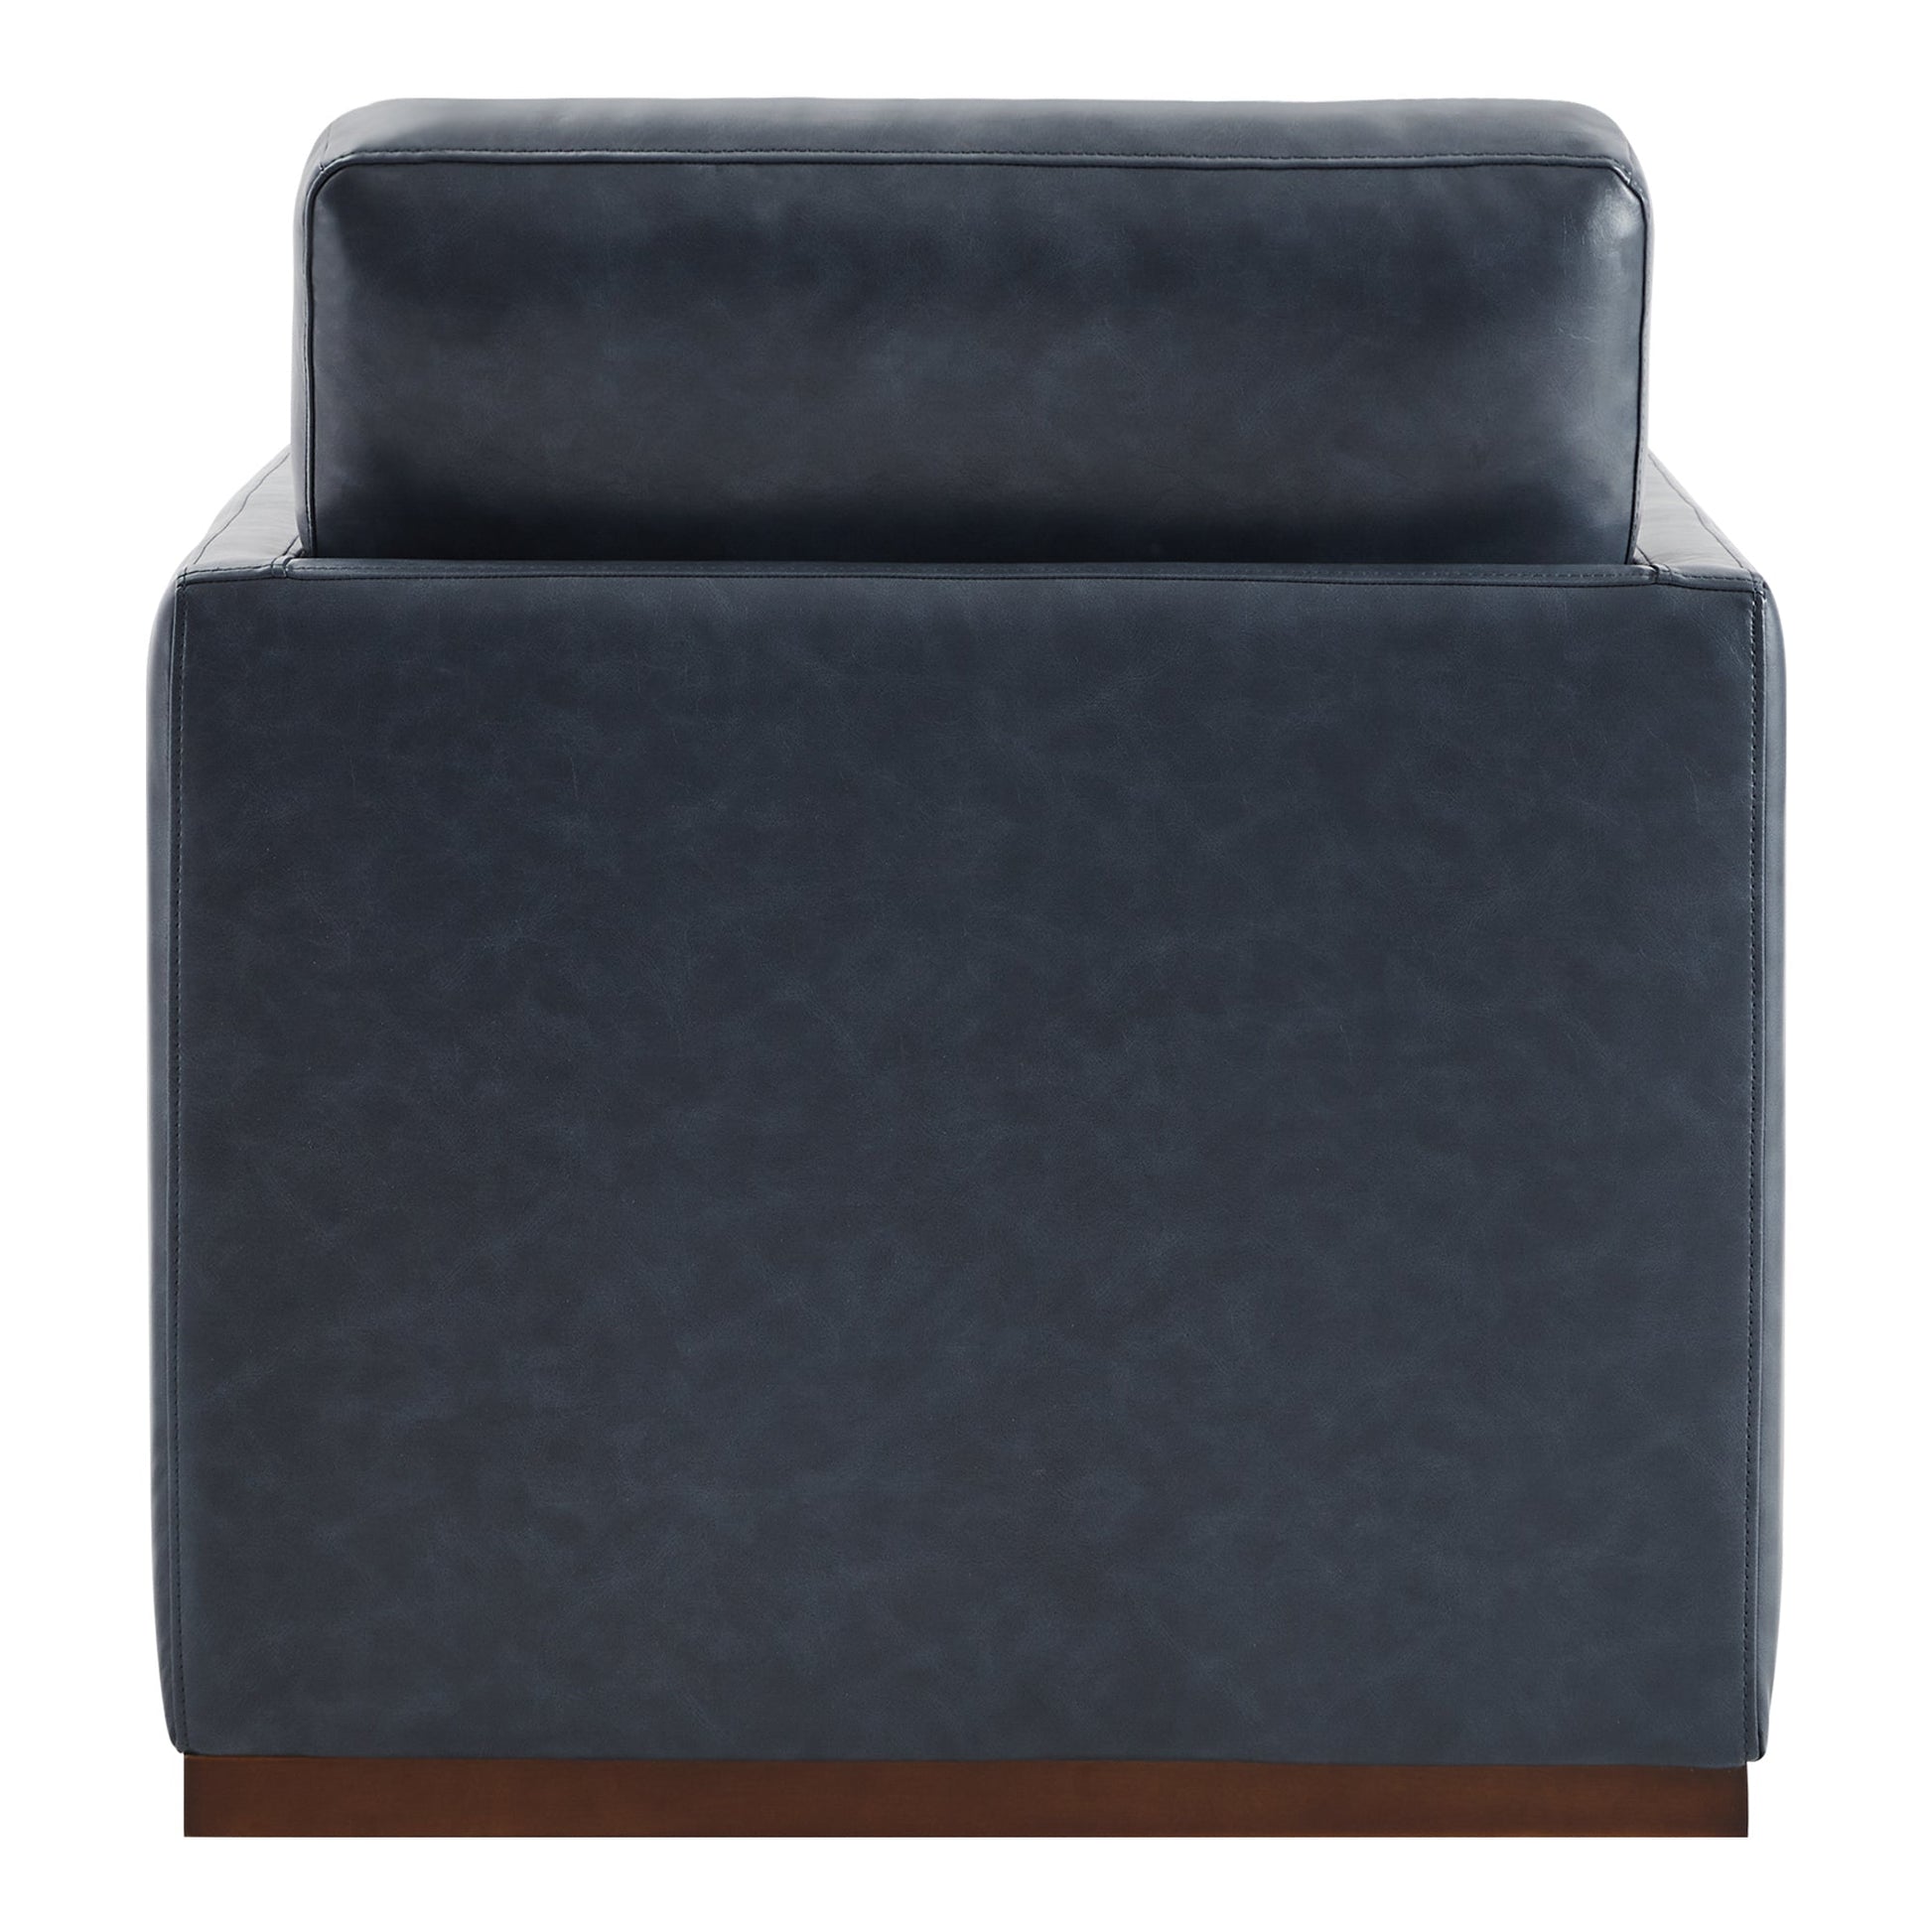 CHITA LIVING-Henry Swivel Accent Chair with Wood Base-Accent Chair-Faux Leather-Navy Blue-